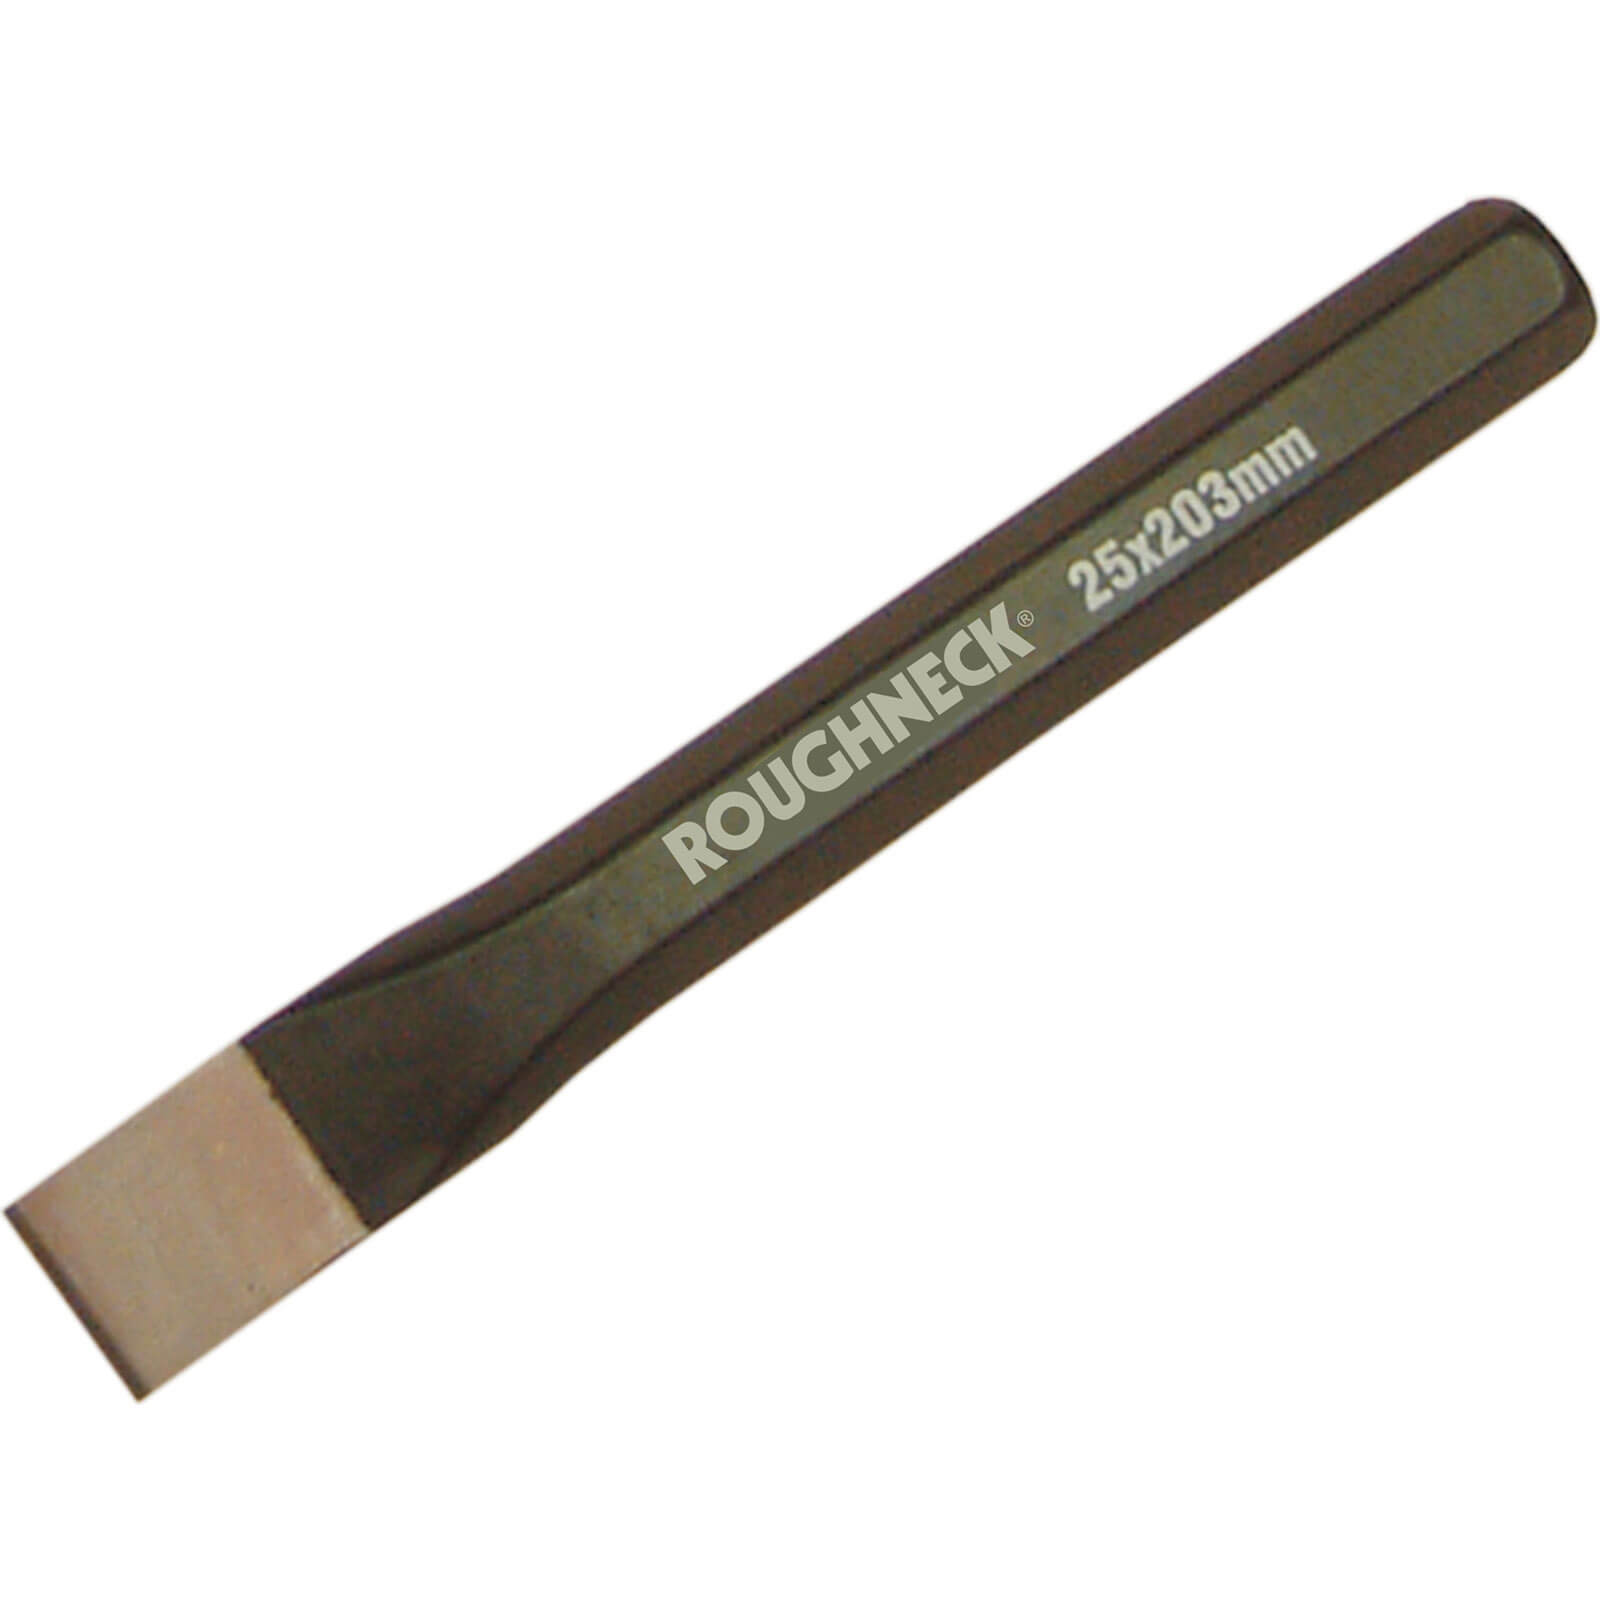 Roughneck Flat Cold Chisel 203mm x 25mm